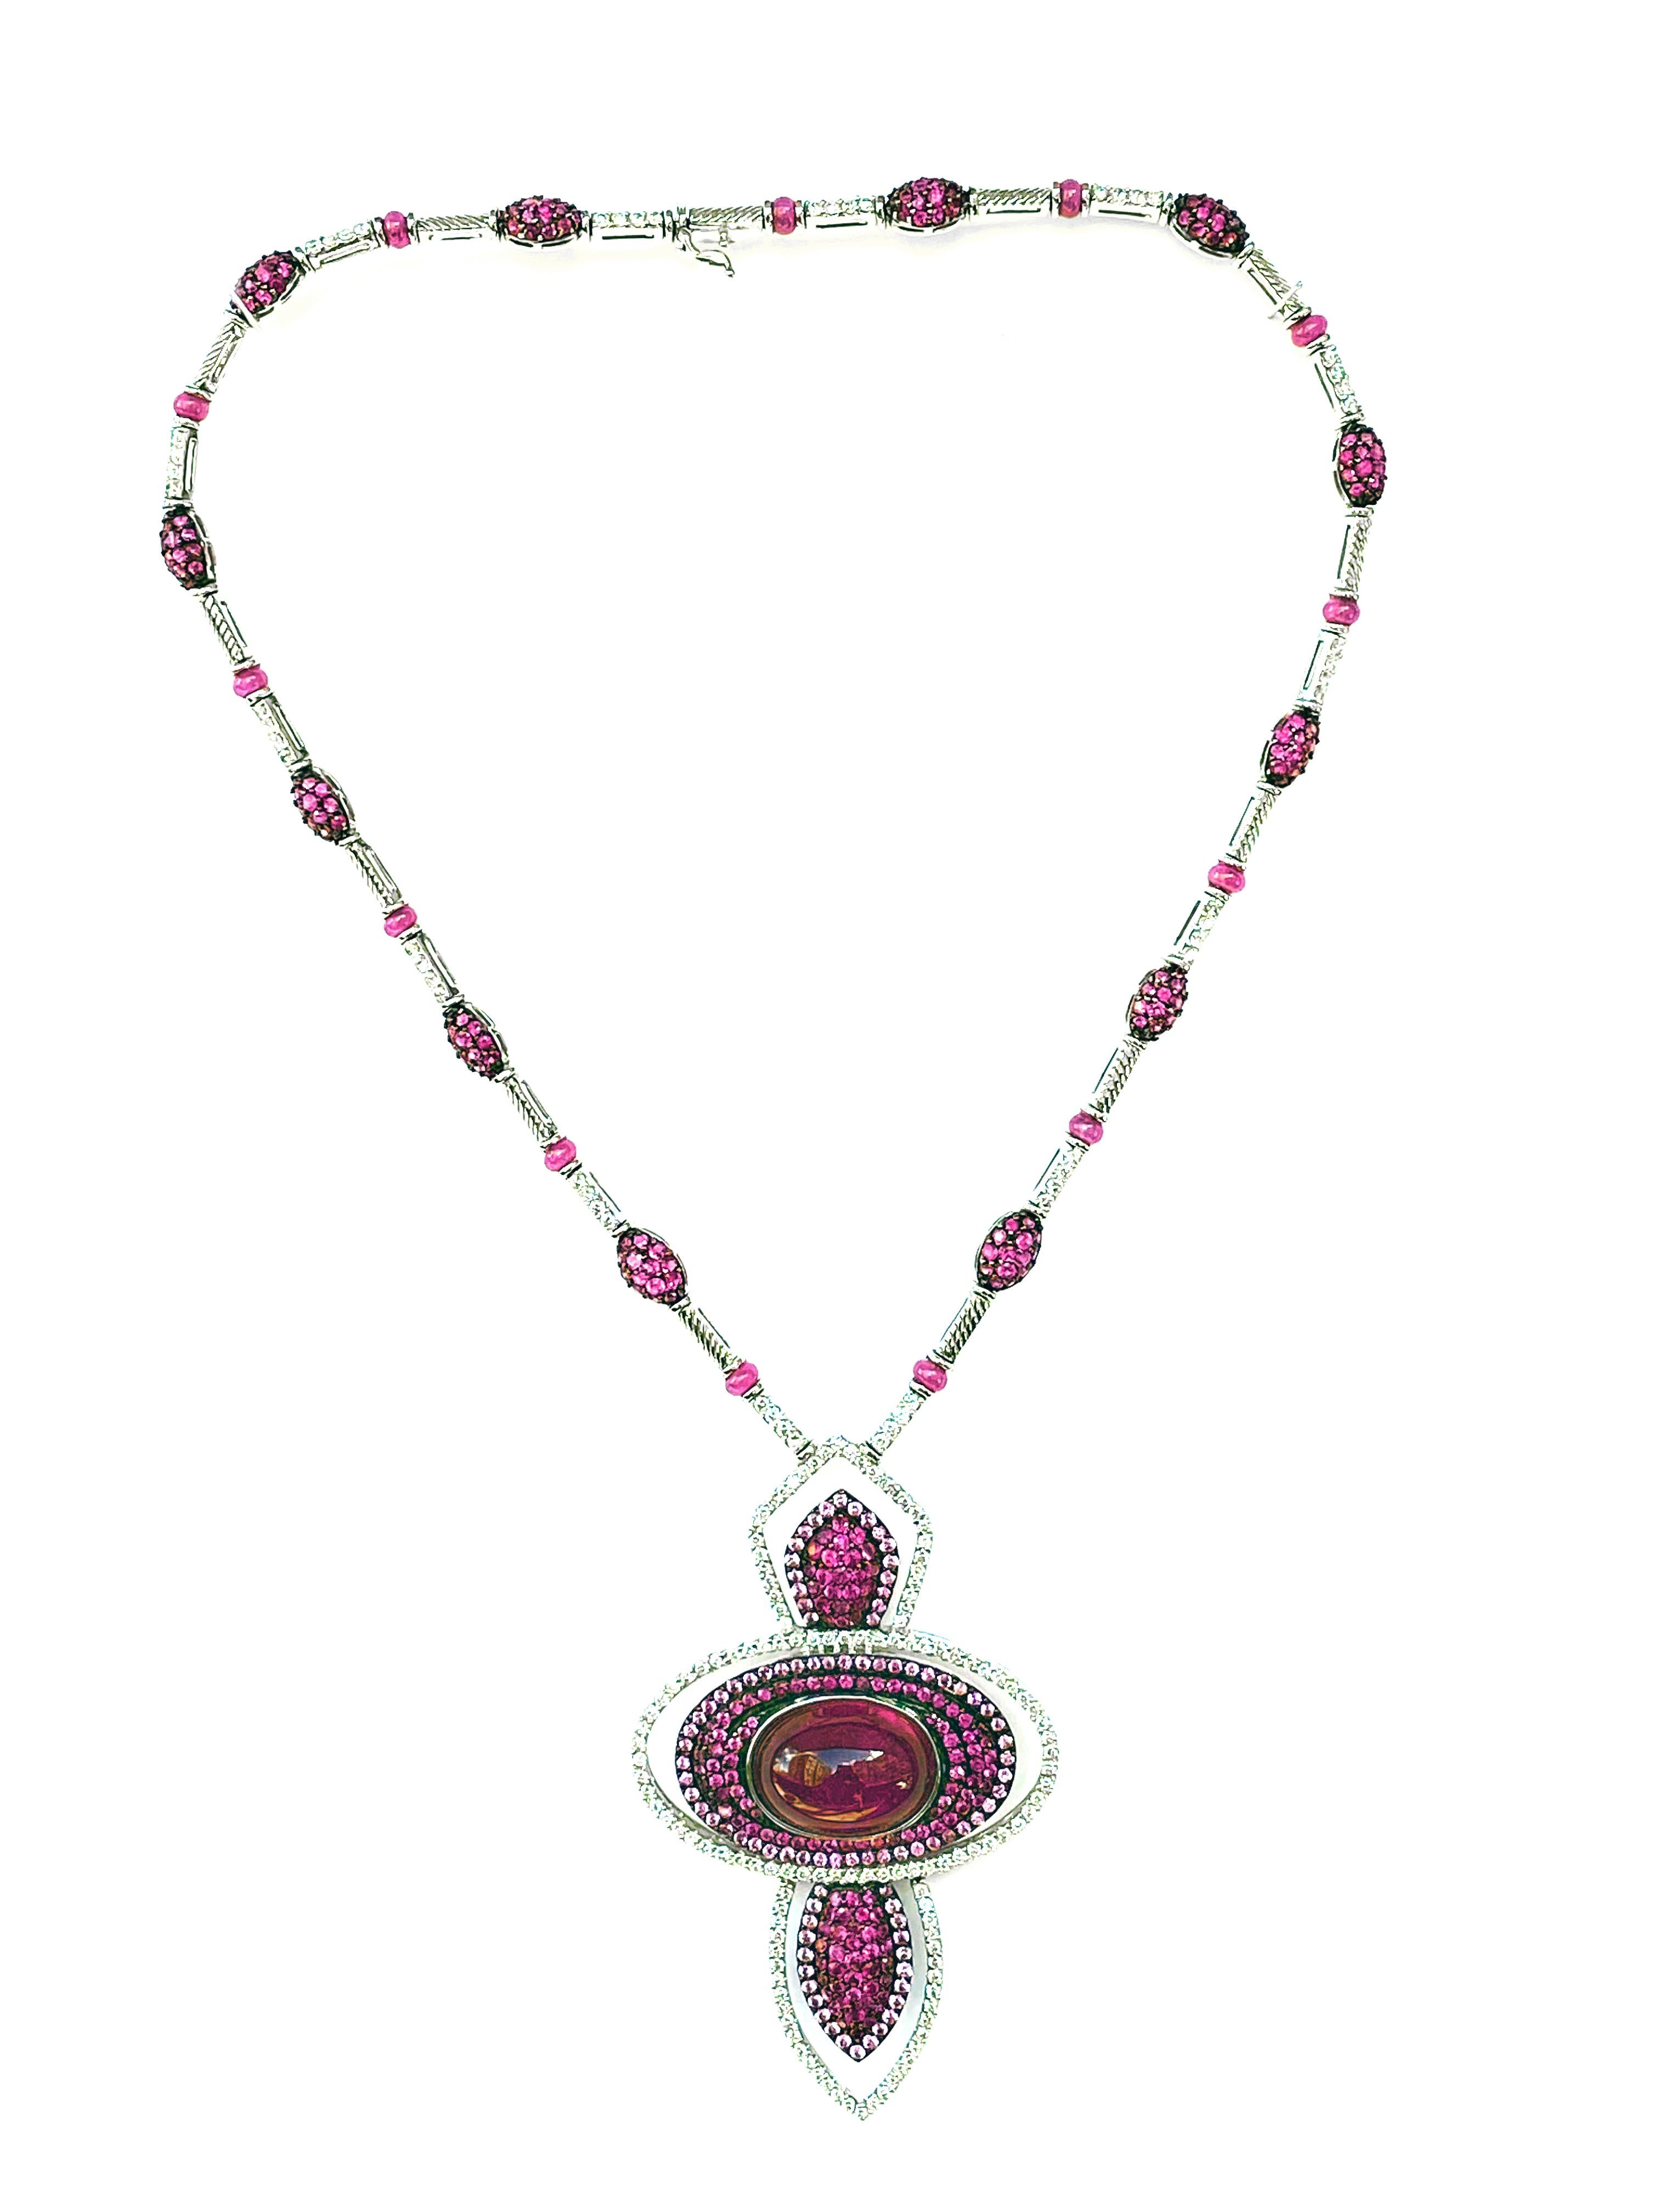 Contemporary 22, 95 Pink Tourmaline, Rubies, Fancy Zapphires Diamonds Necklace For Sale